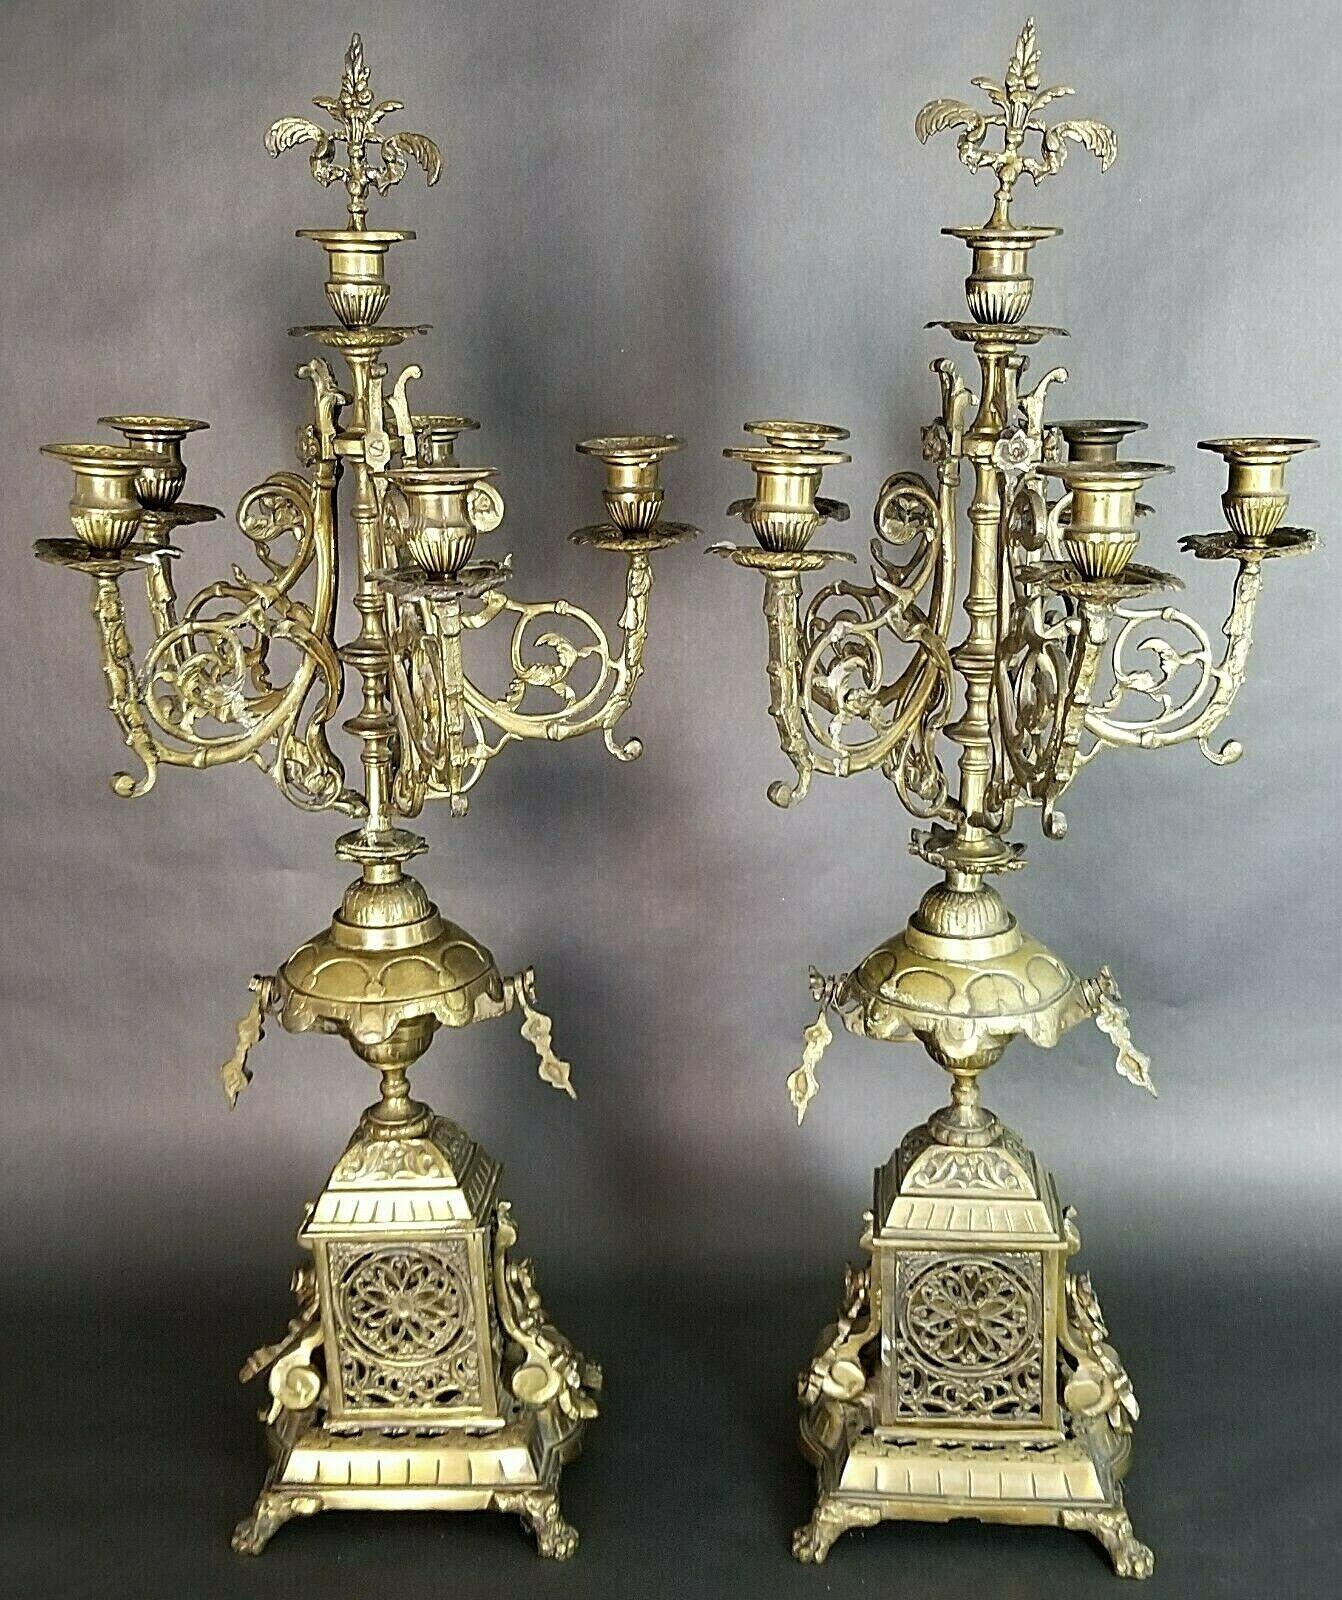 Pair of antique Italian Ornate bronze French Louis XV style Rococo 6 point candelabras

Center top 6th candle holder has a removable finial which may be able to be used as a snuffer.

Approximate Measurements
26 1/2